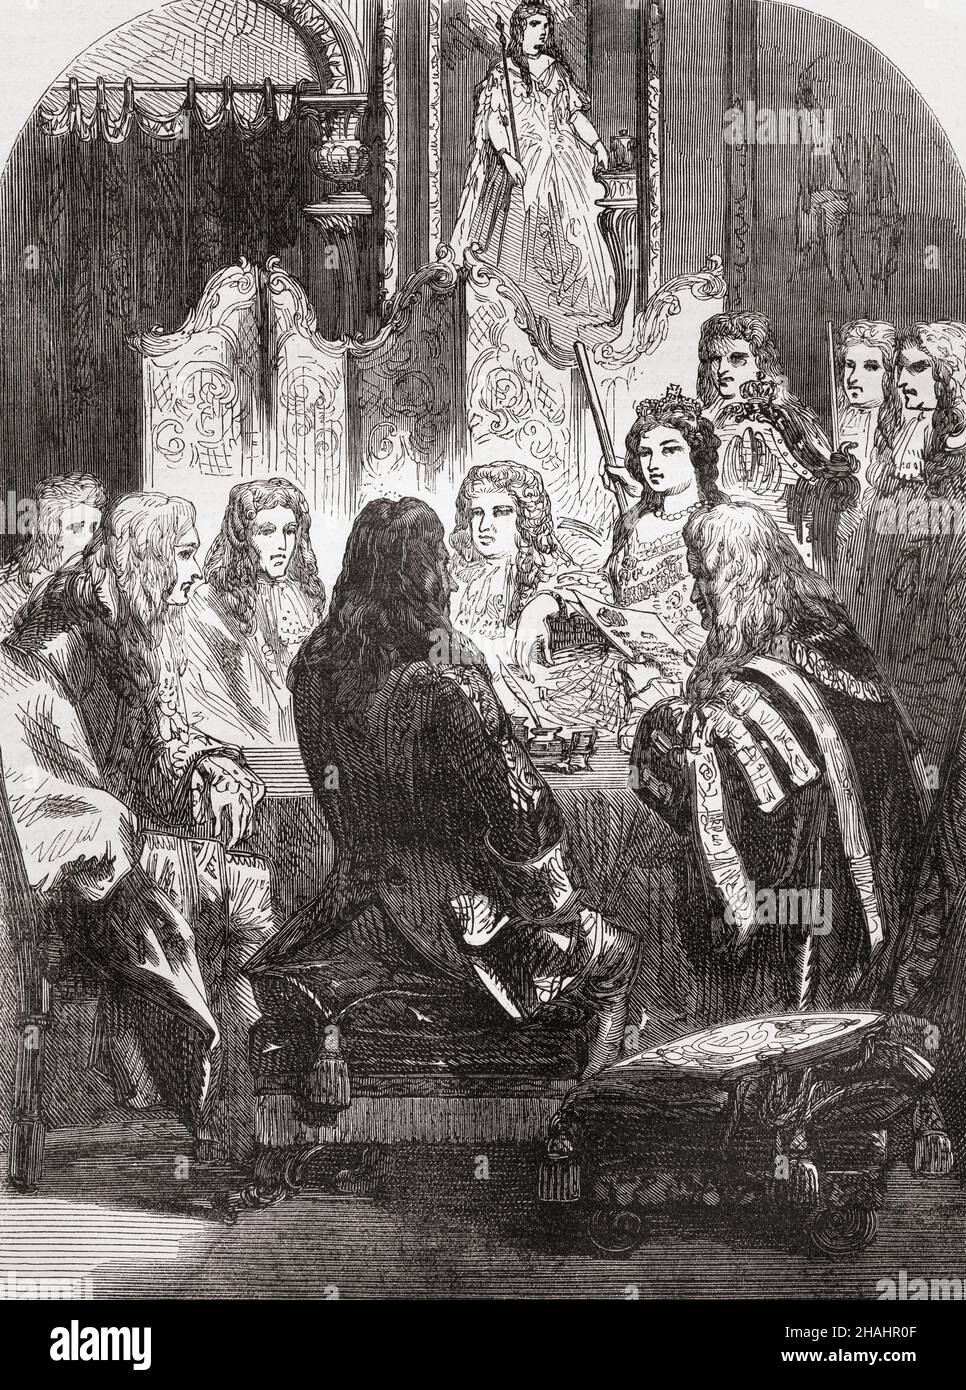 Queen Anne with her privy council.  Anne, 1665 –1714.  Queen of England, Scotland and Ireland, 1702 - 1707. On 1 May 1707, under the Acts of Union, the kingdoms of England and Scotland united as a single sovereign state known as Great Britain.  From Cassell's Illustrated History of England, published c.1890. Stock Photo